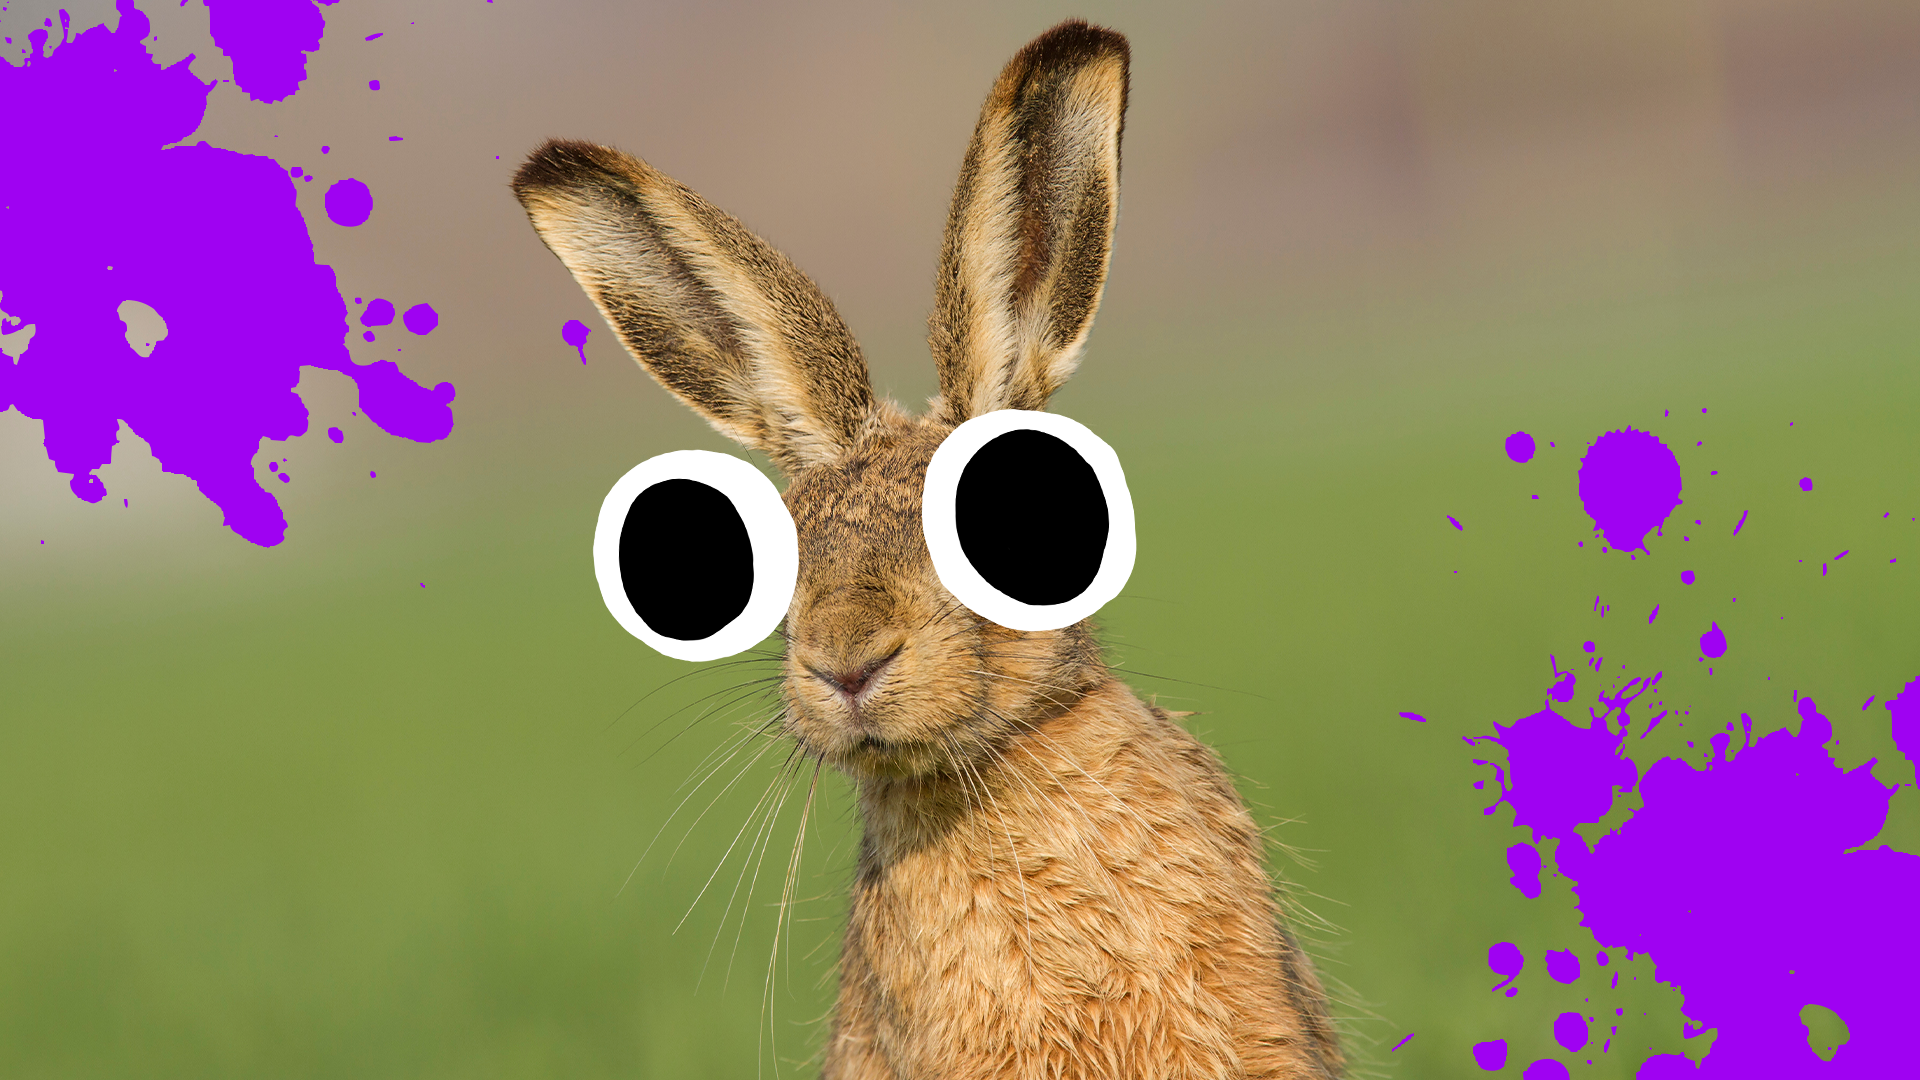 A goofy looking hare and purple splats